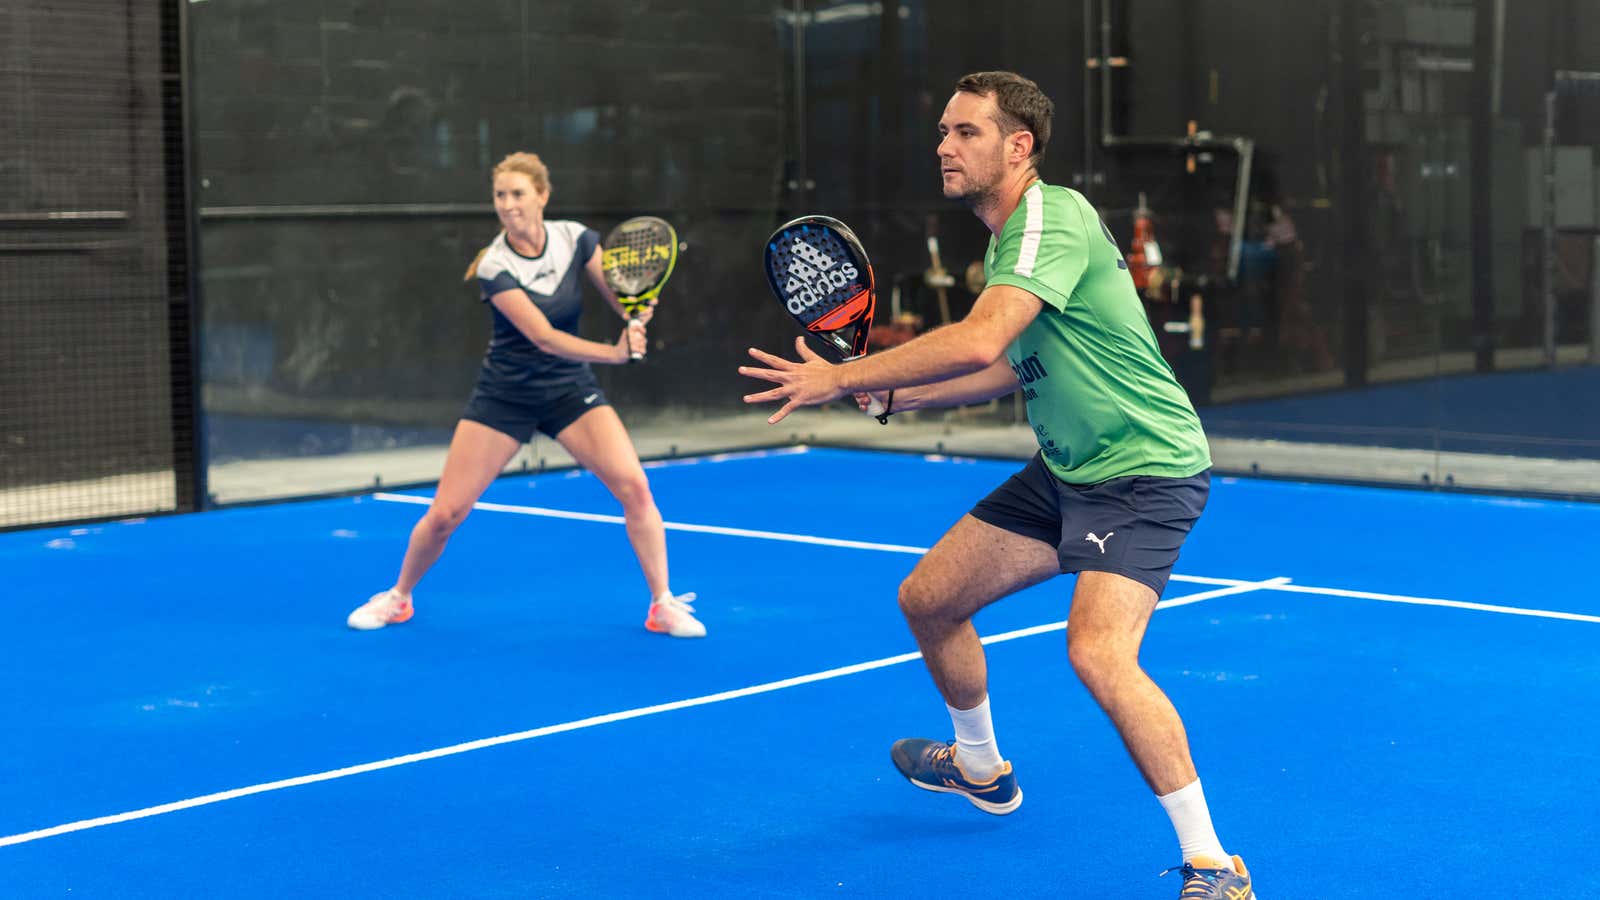 What is Padel Tennis? -  - A mix between squash and